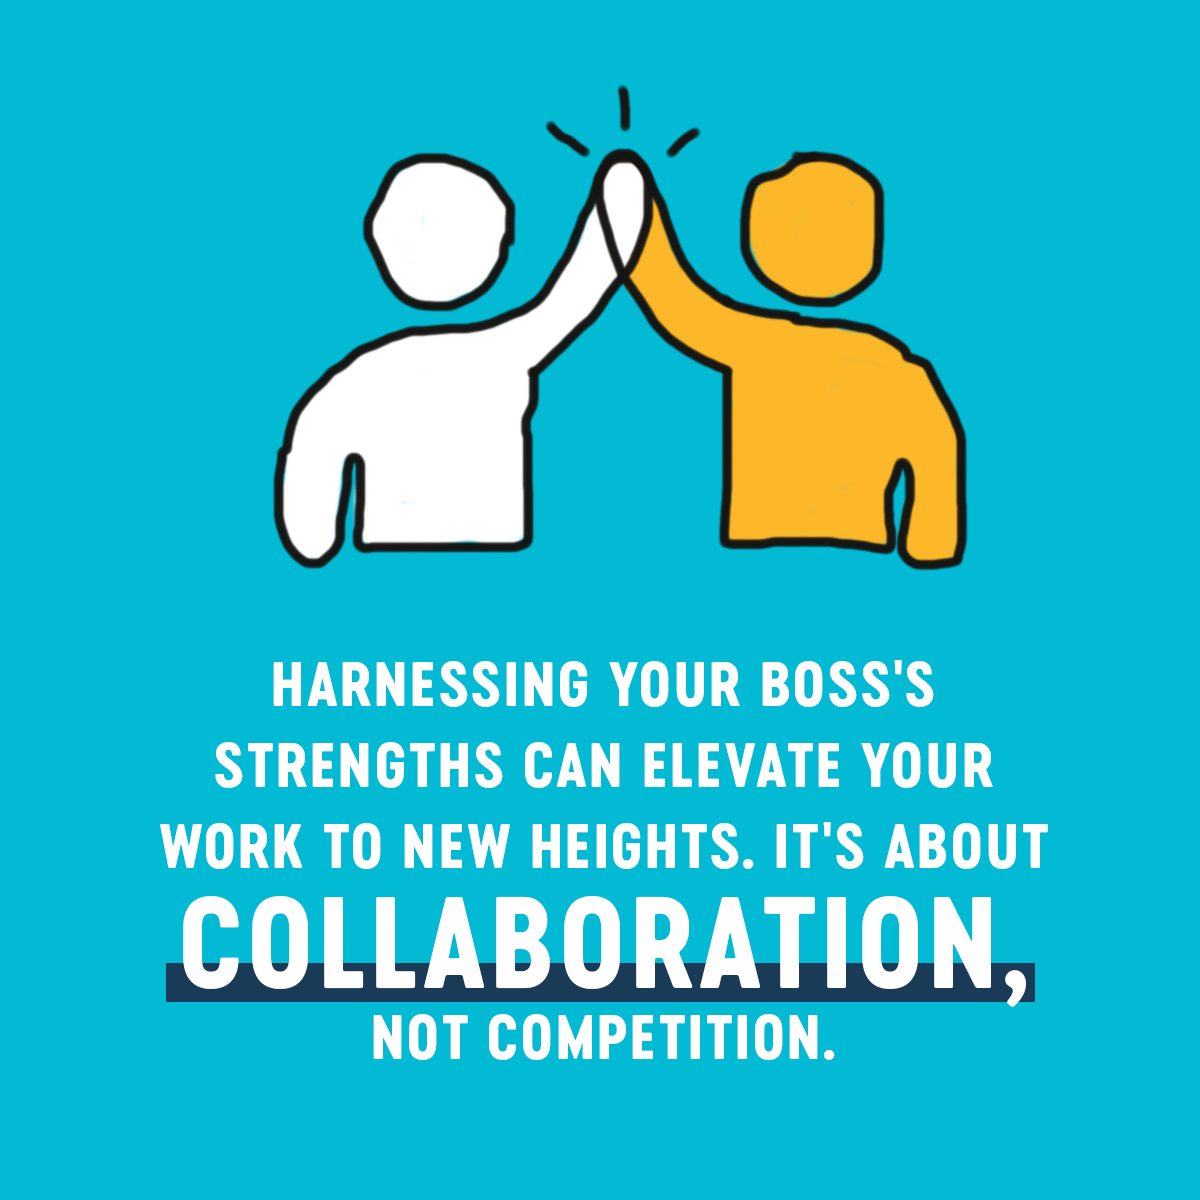 Leverage your boss's strengths—like their critical insight or vision—to boost your work. Involve them in crucial projects for a fresh perspective that enhances outcomes and teamwork. Leadership thrives on shared growth. #Multipliers